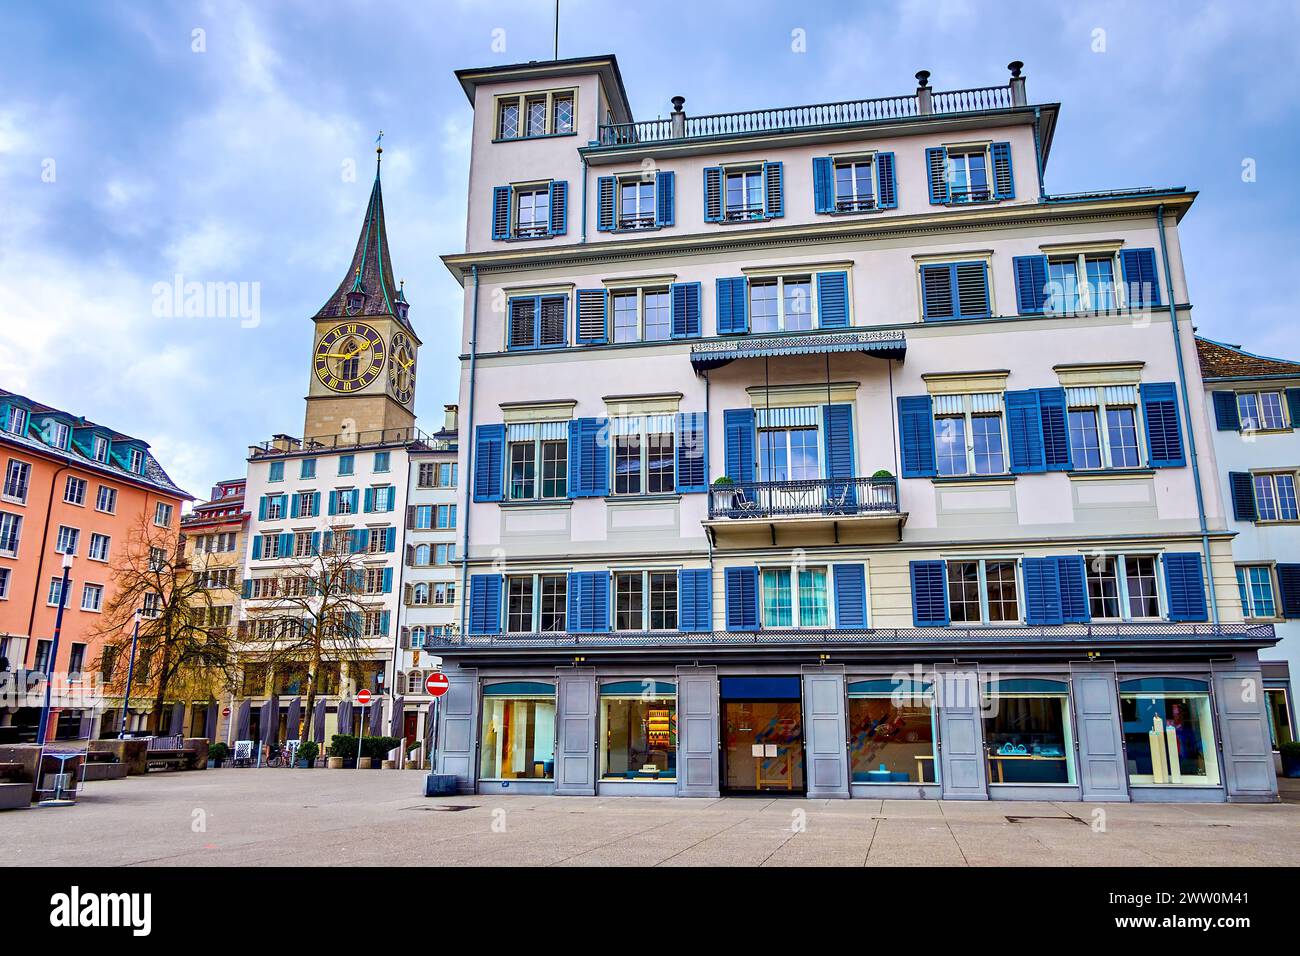 Weinplatz square with scenic old houses and the bell tower of Peterskirche above the roofs, Zurich, Switzerland Stock Photo